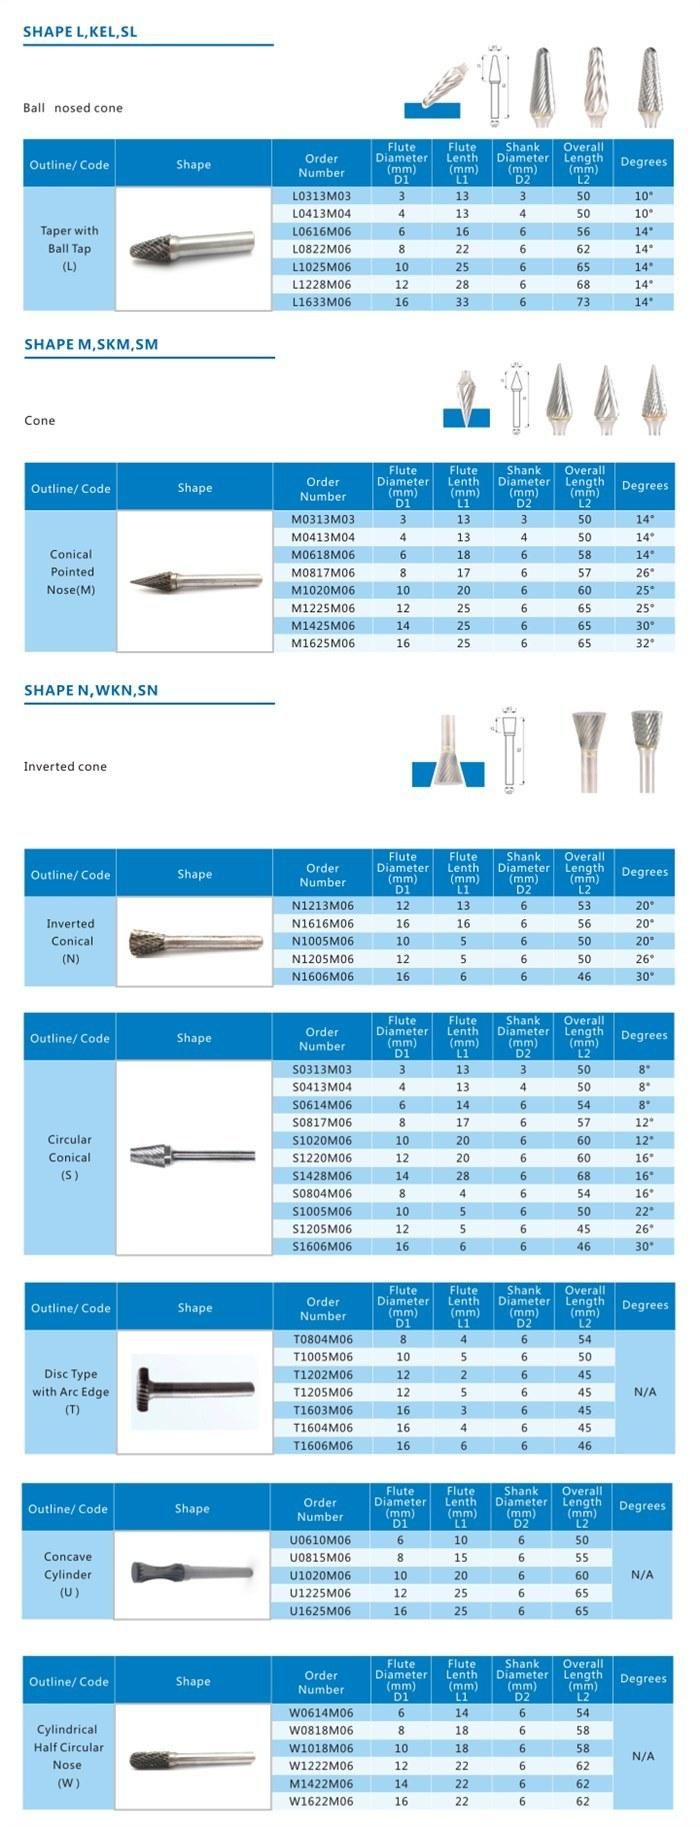 Solid Carbide Rotary Burrs with Tree Radius Sf-3 for Cleaning Cast Materials